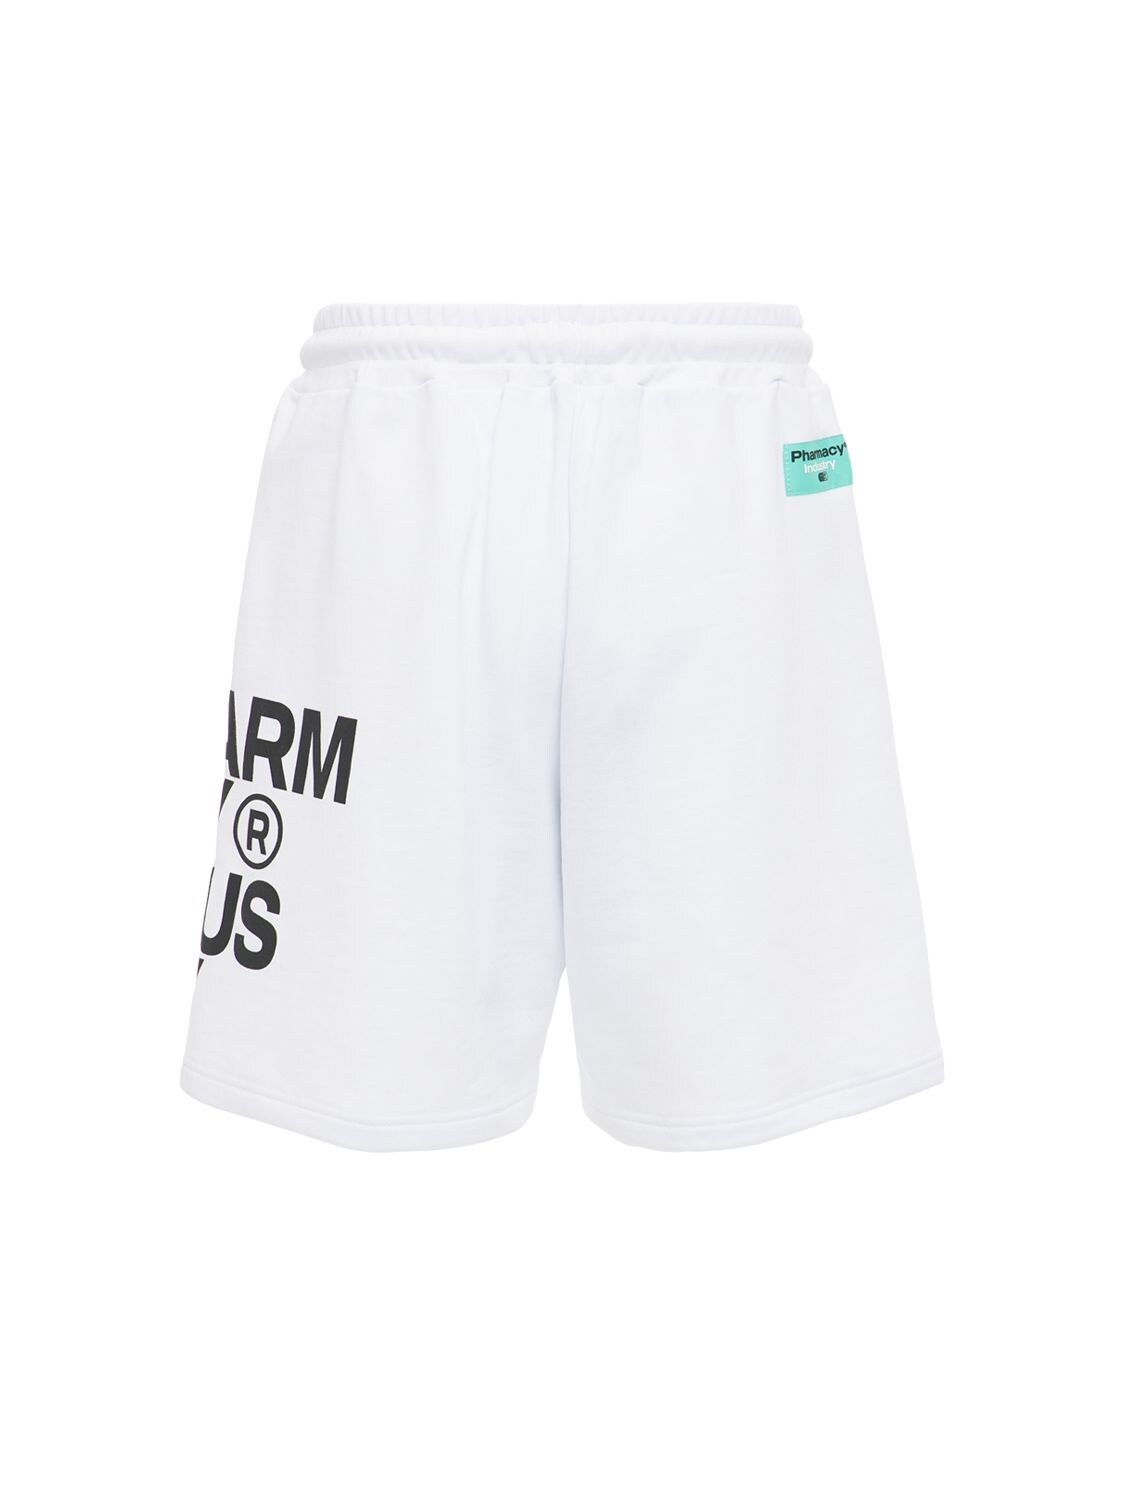 PHARMACY INDUSTRY Cottons LOGO PRINTED COTTON SHORTS